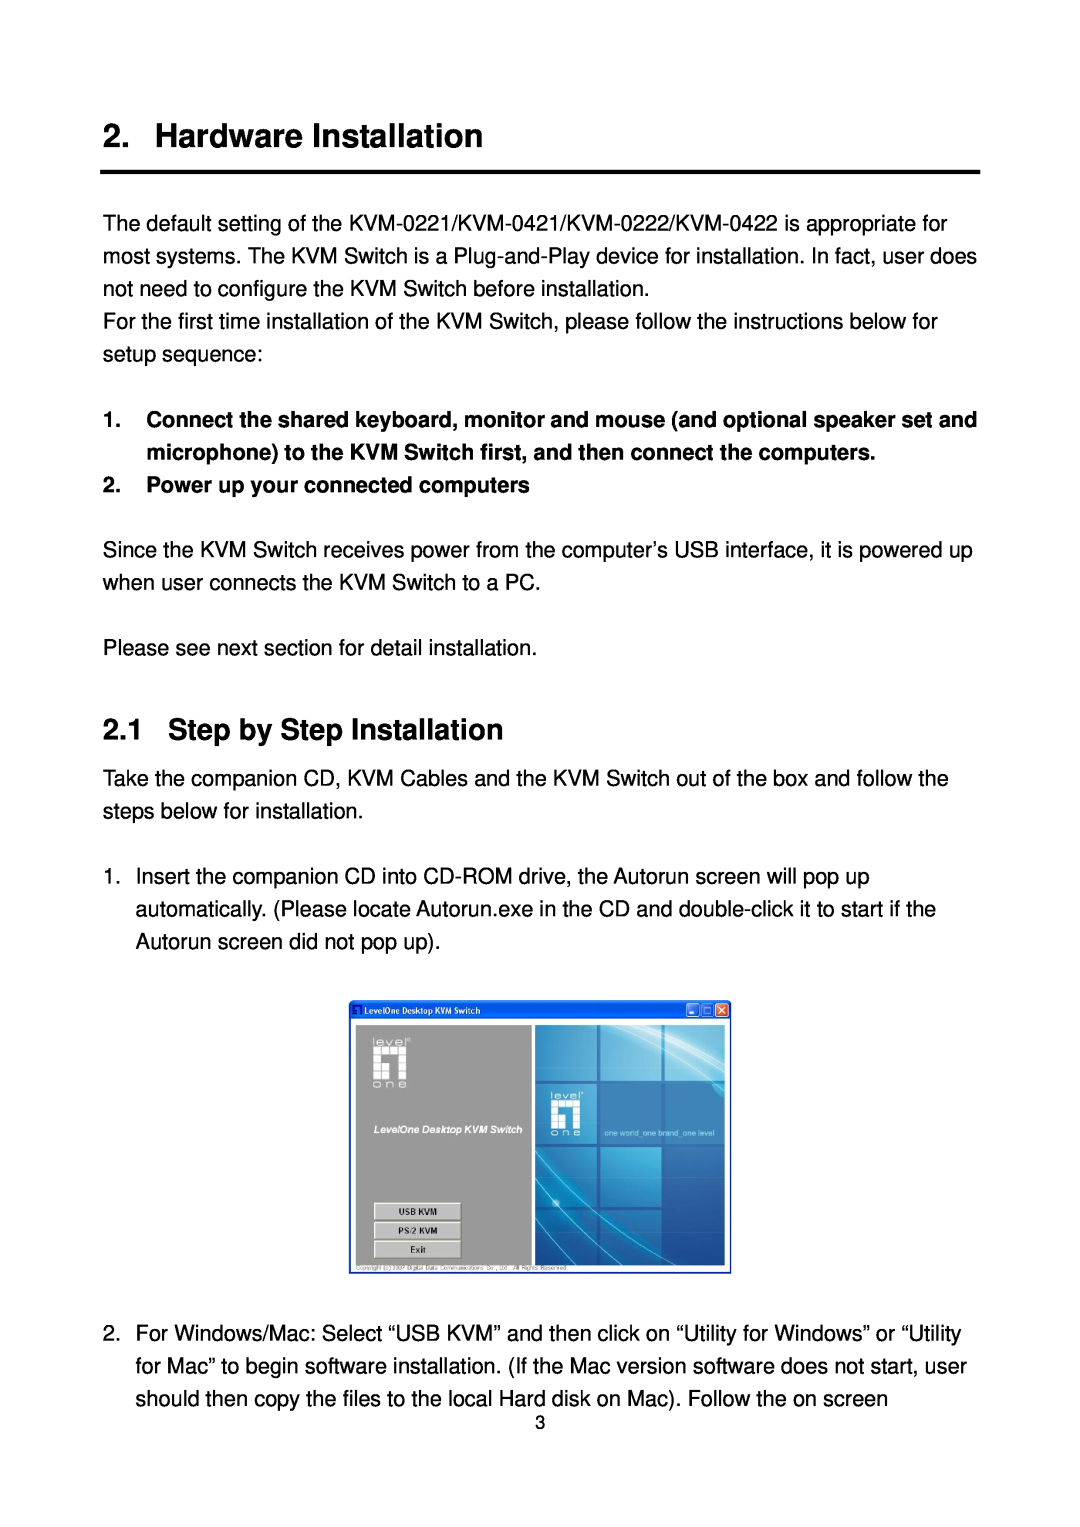 LevelOne KVM-0222/KVM-0422 user manual Hardware Installation, Step by Step Installation, Power up your connected computers 